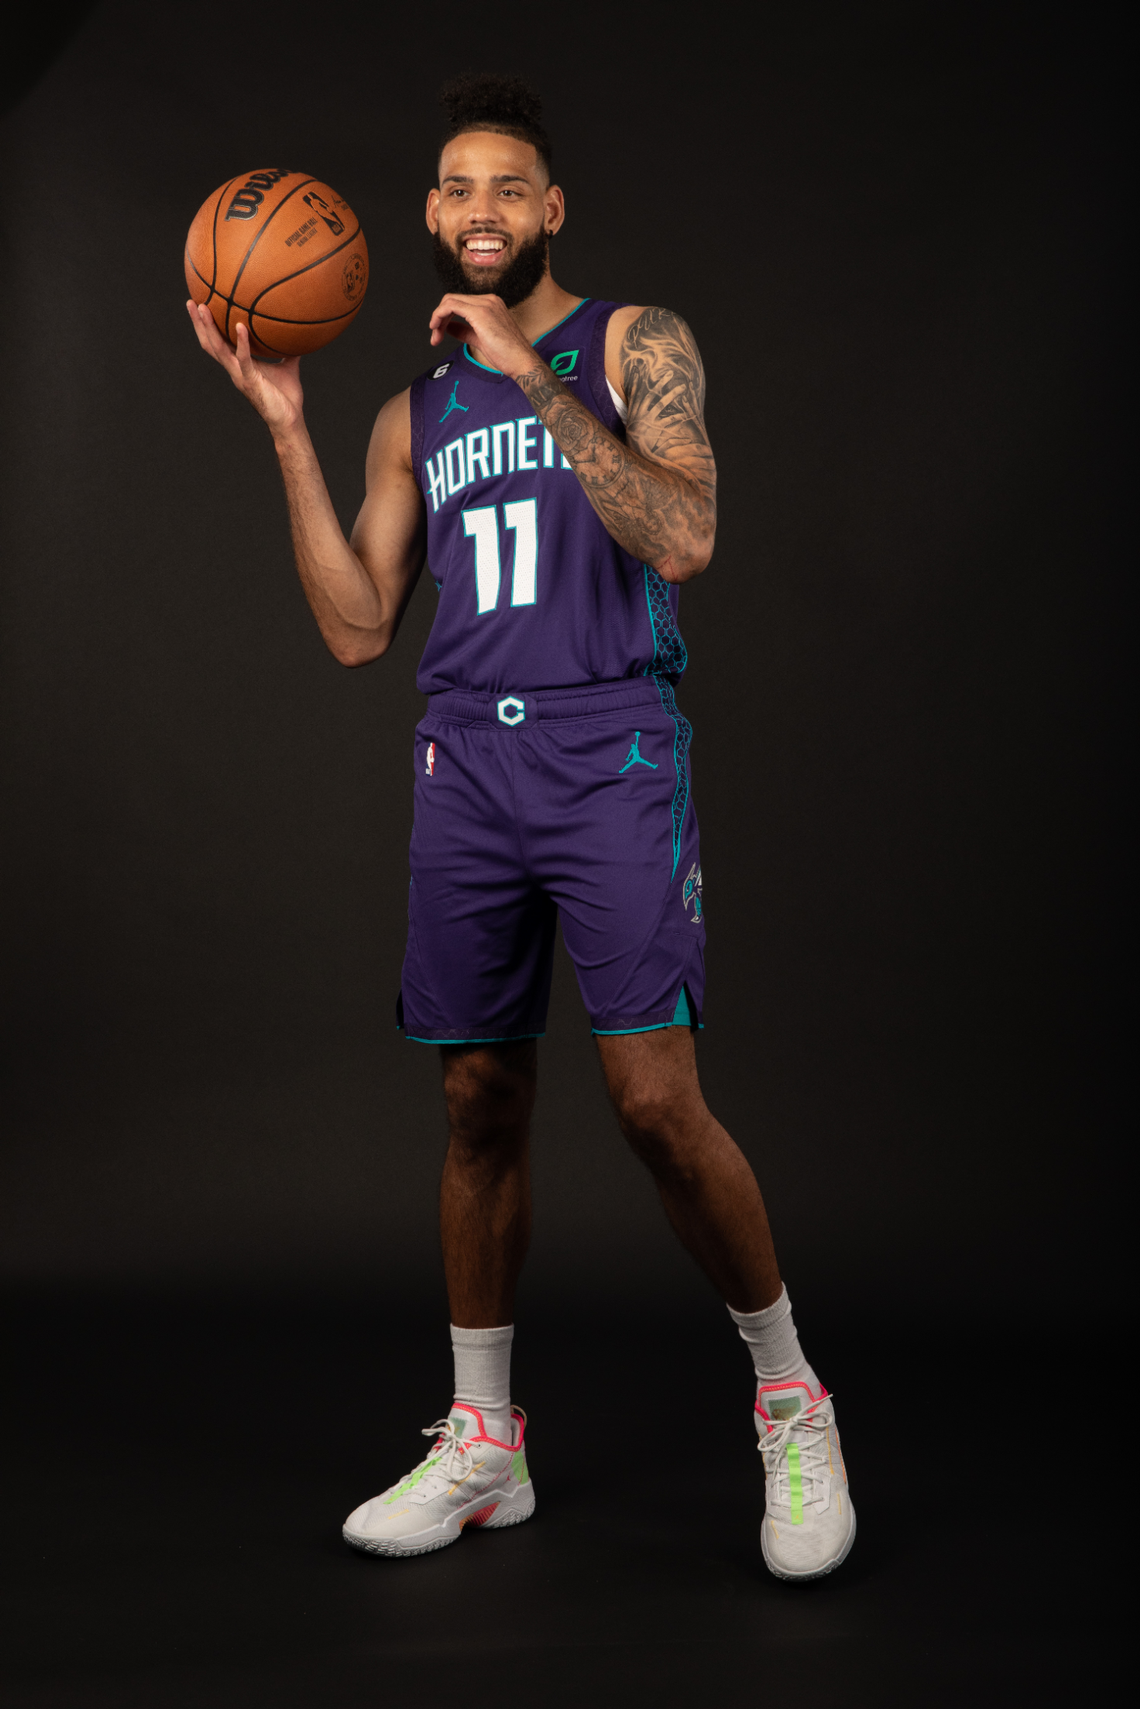 Hornets unveiled their classic uniforms for their upcoming 35th